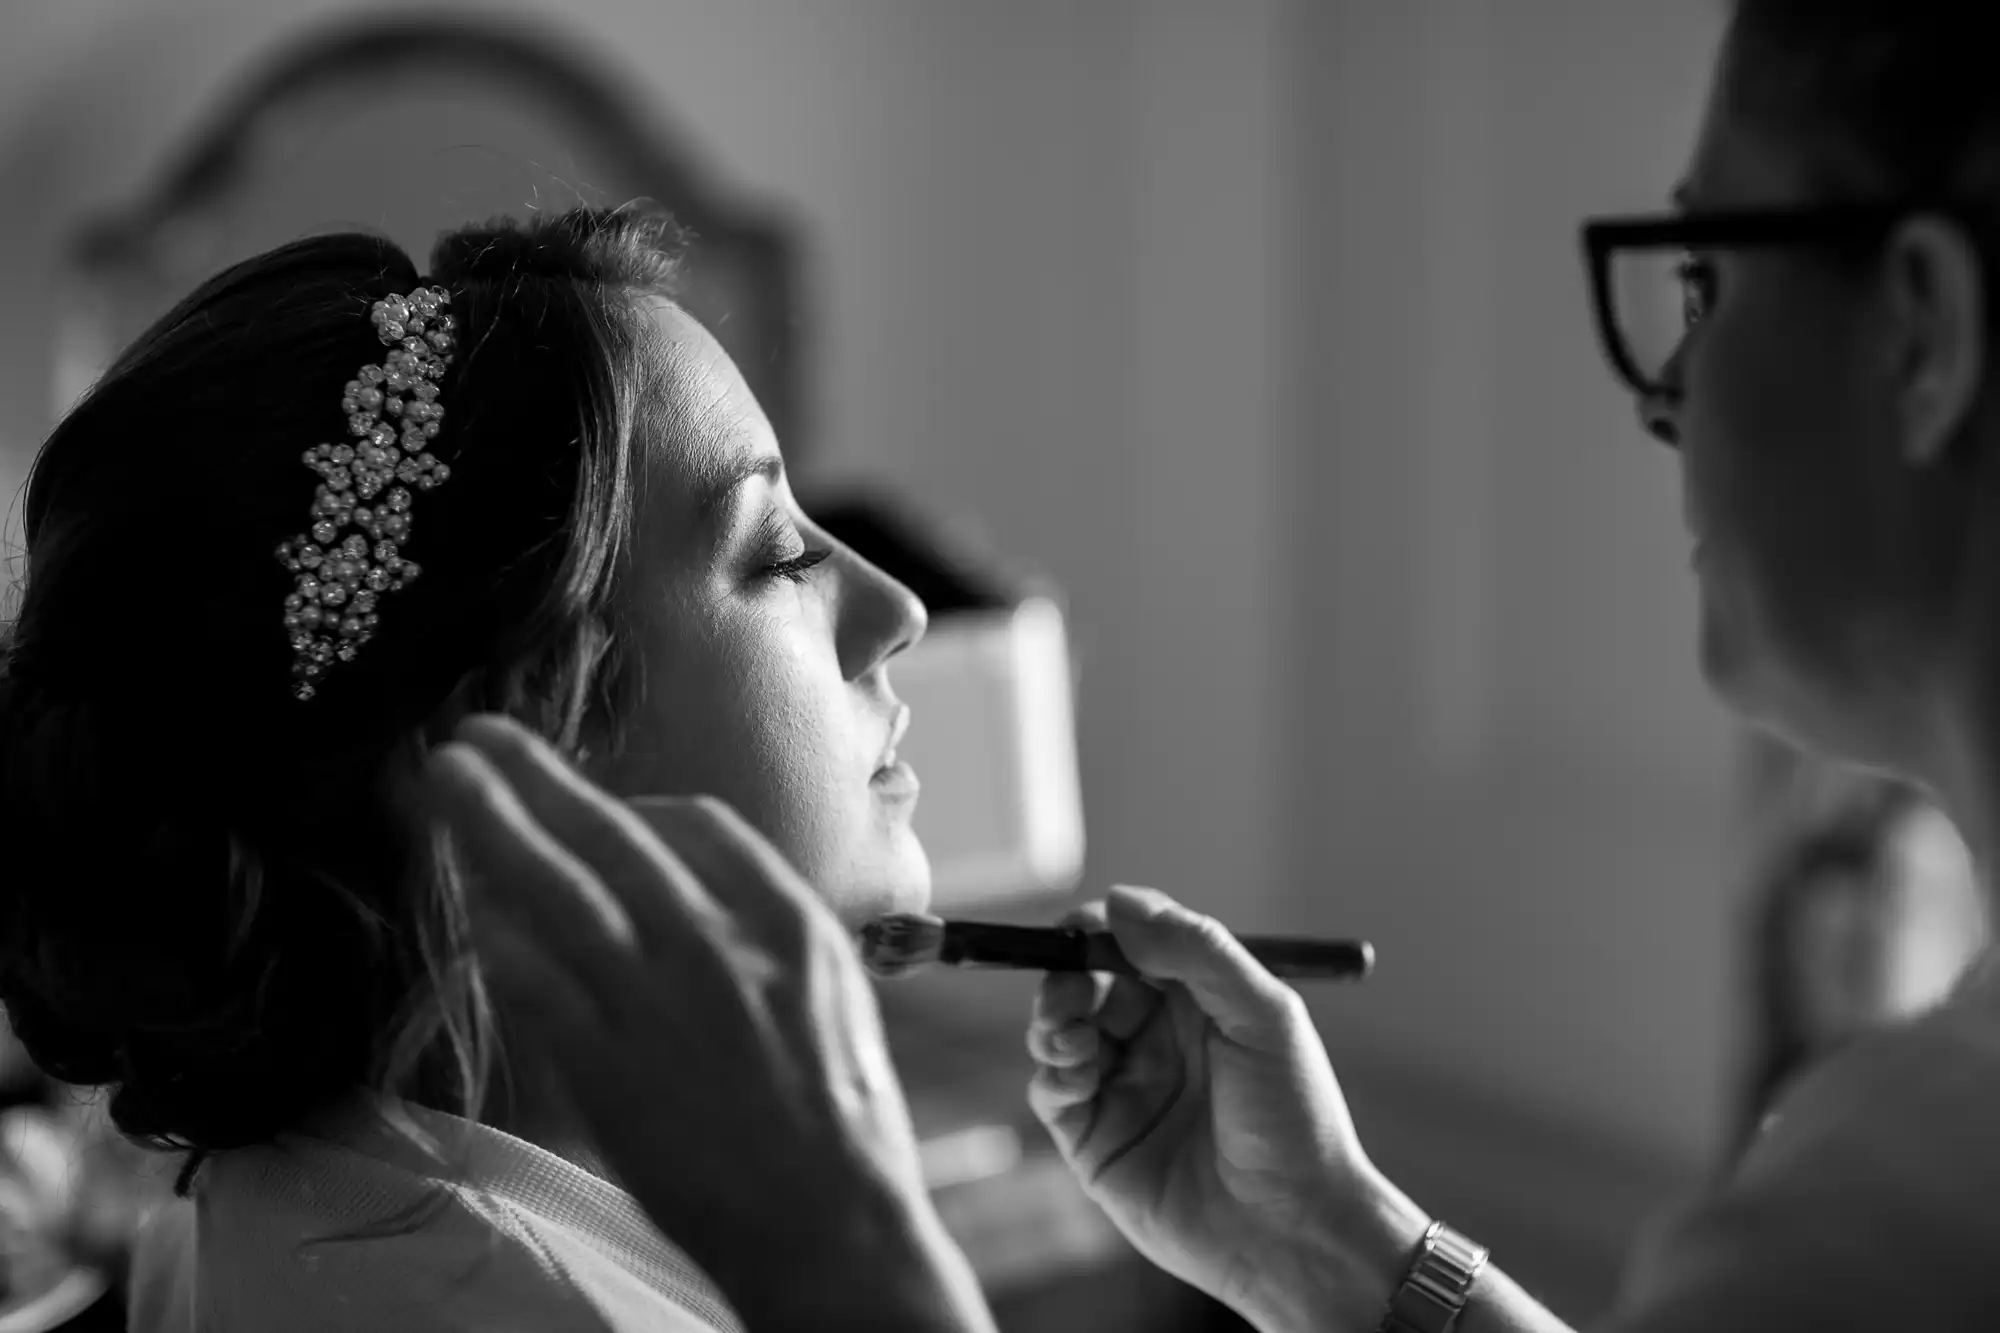 A bride with a beaded hair accessory is having makeup applied by another person holding a brush. The scene is in black and white.